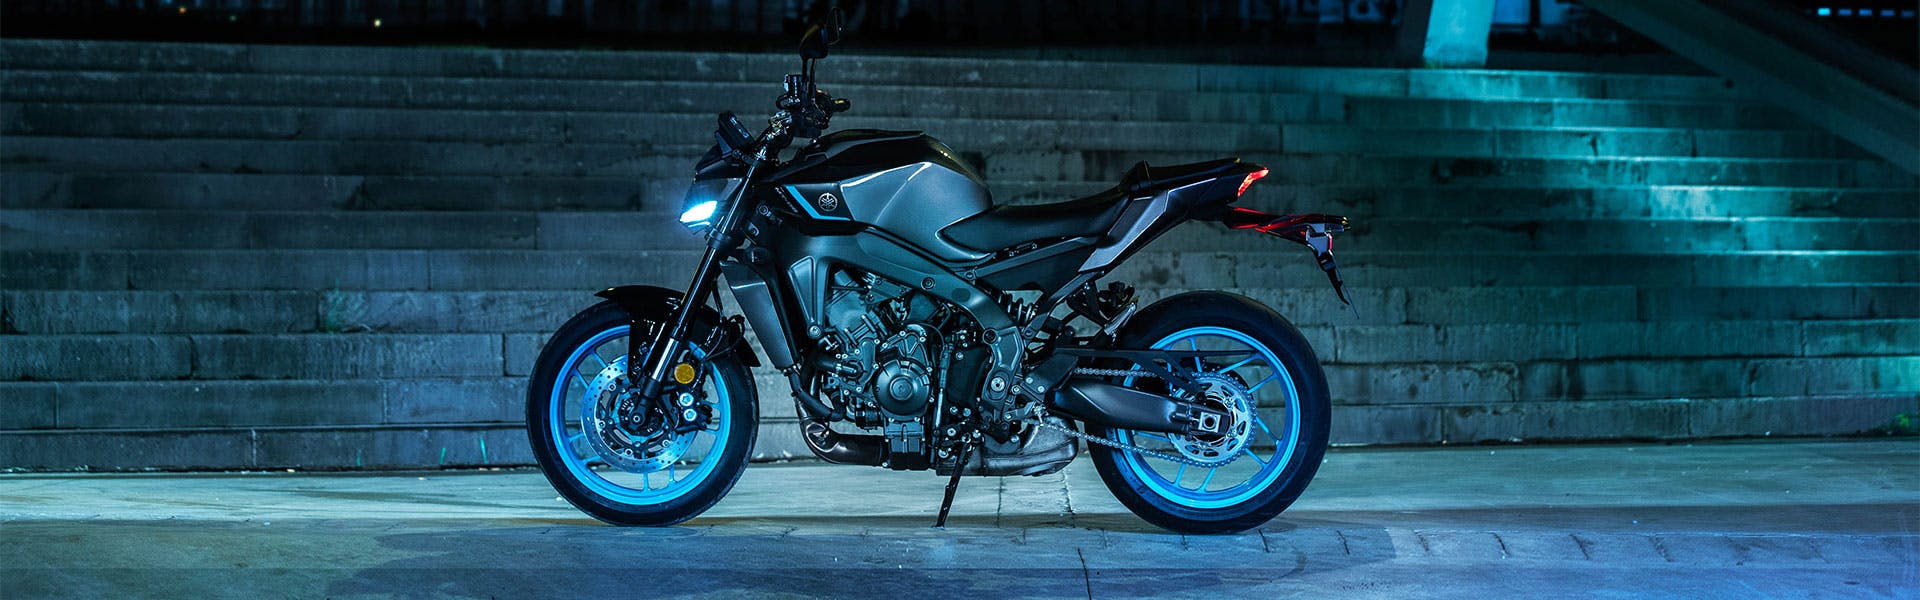 Yamaha MT-09 in cyan colour on the road.